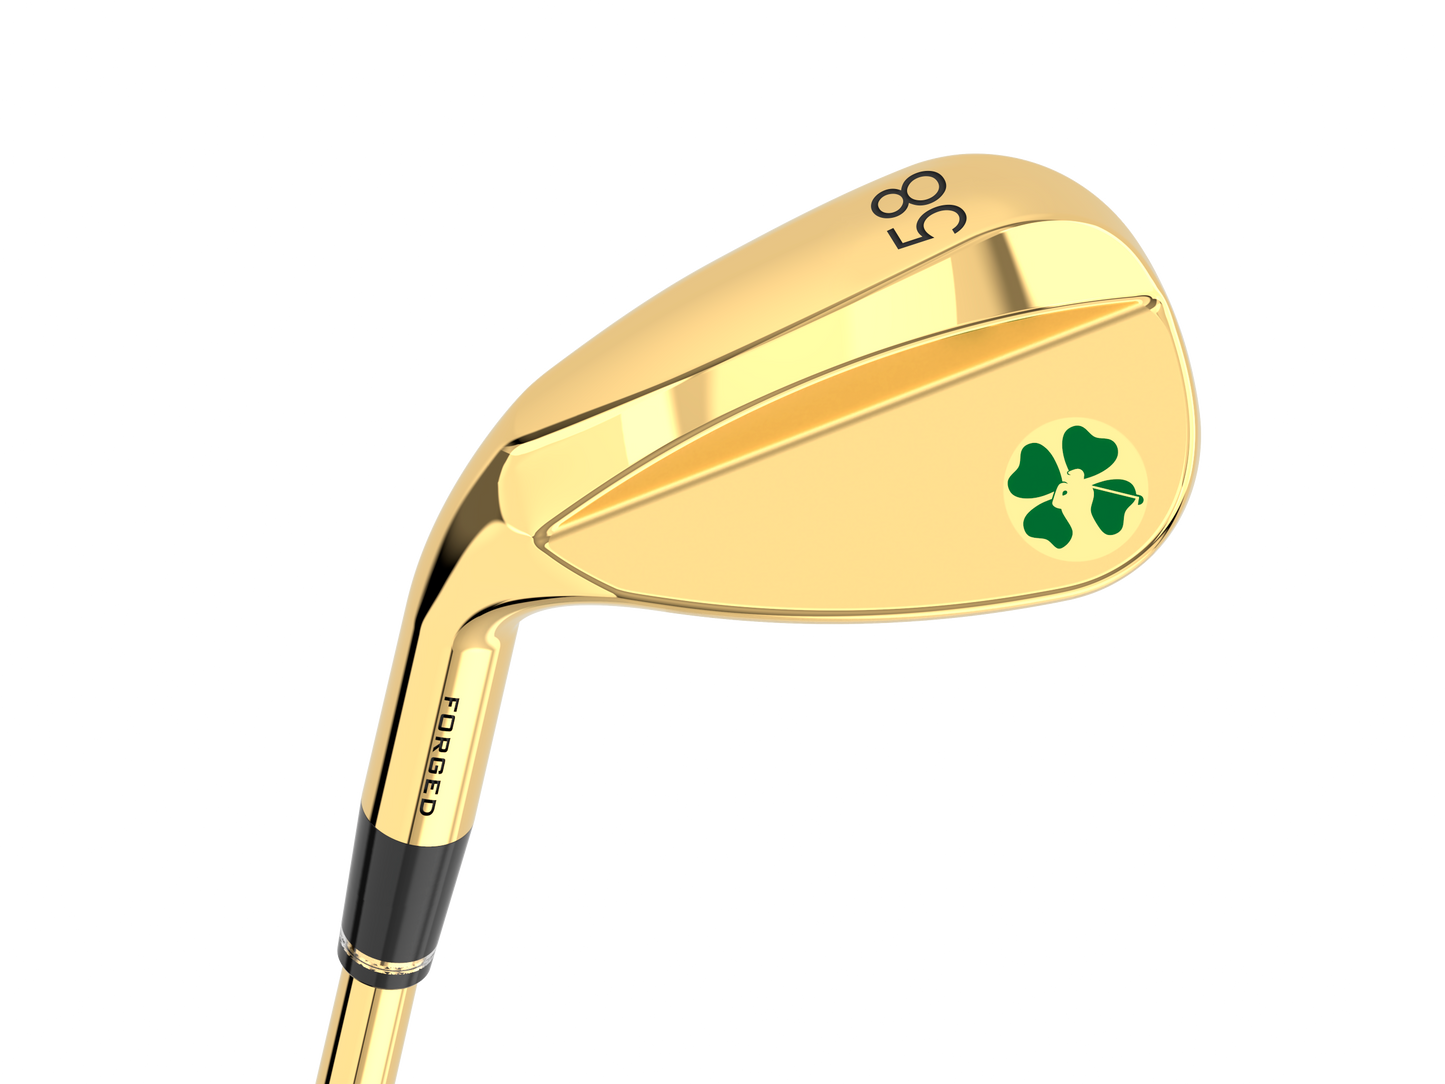 LEFT-Hand Signature Gold Flop Wedge (58)